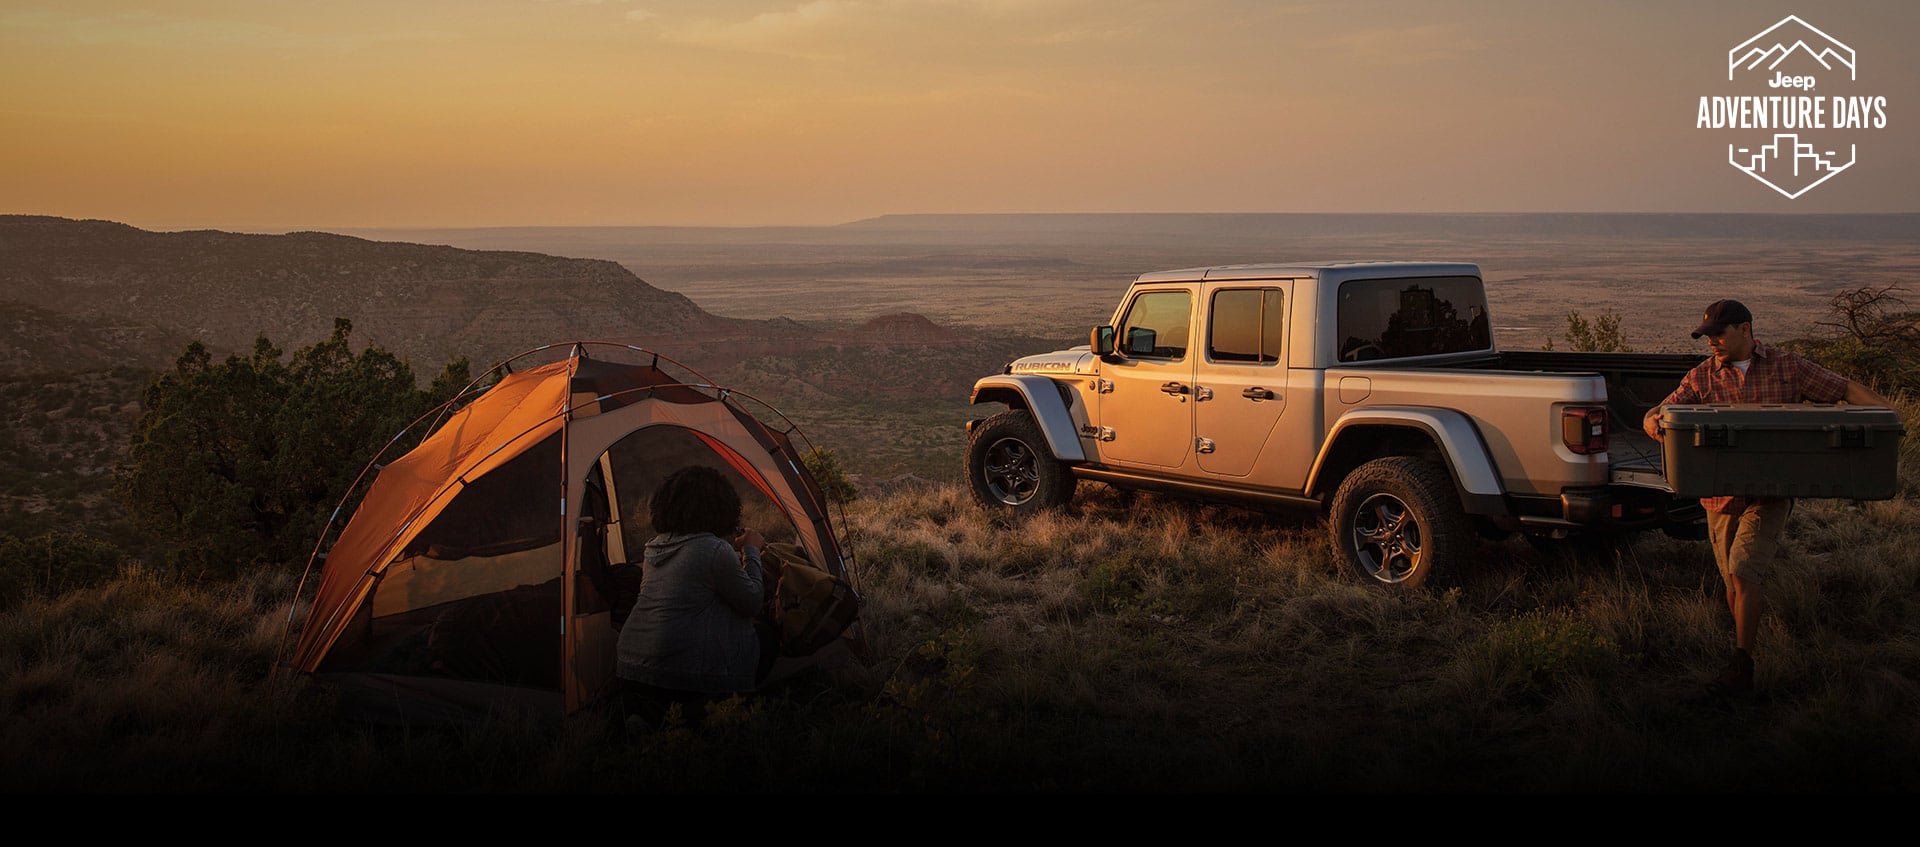 A driver-side rear profile of a 2023 Jeep Gladiator Rubicon parked on a hilltop at dusk with its tailgate open and a man carrying a cooler to a nearby campsite. Jeep Adventure Days logo.